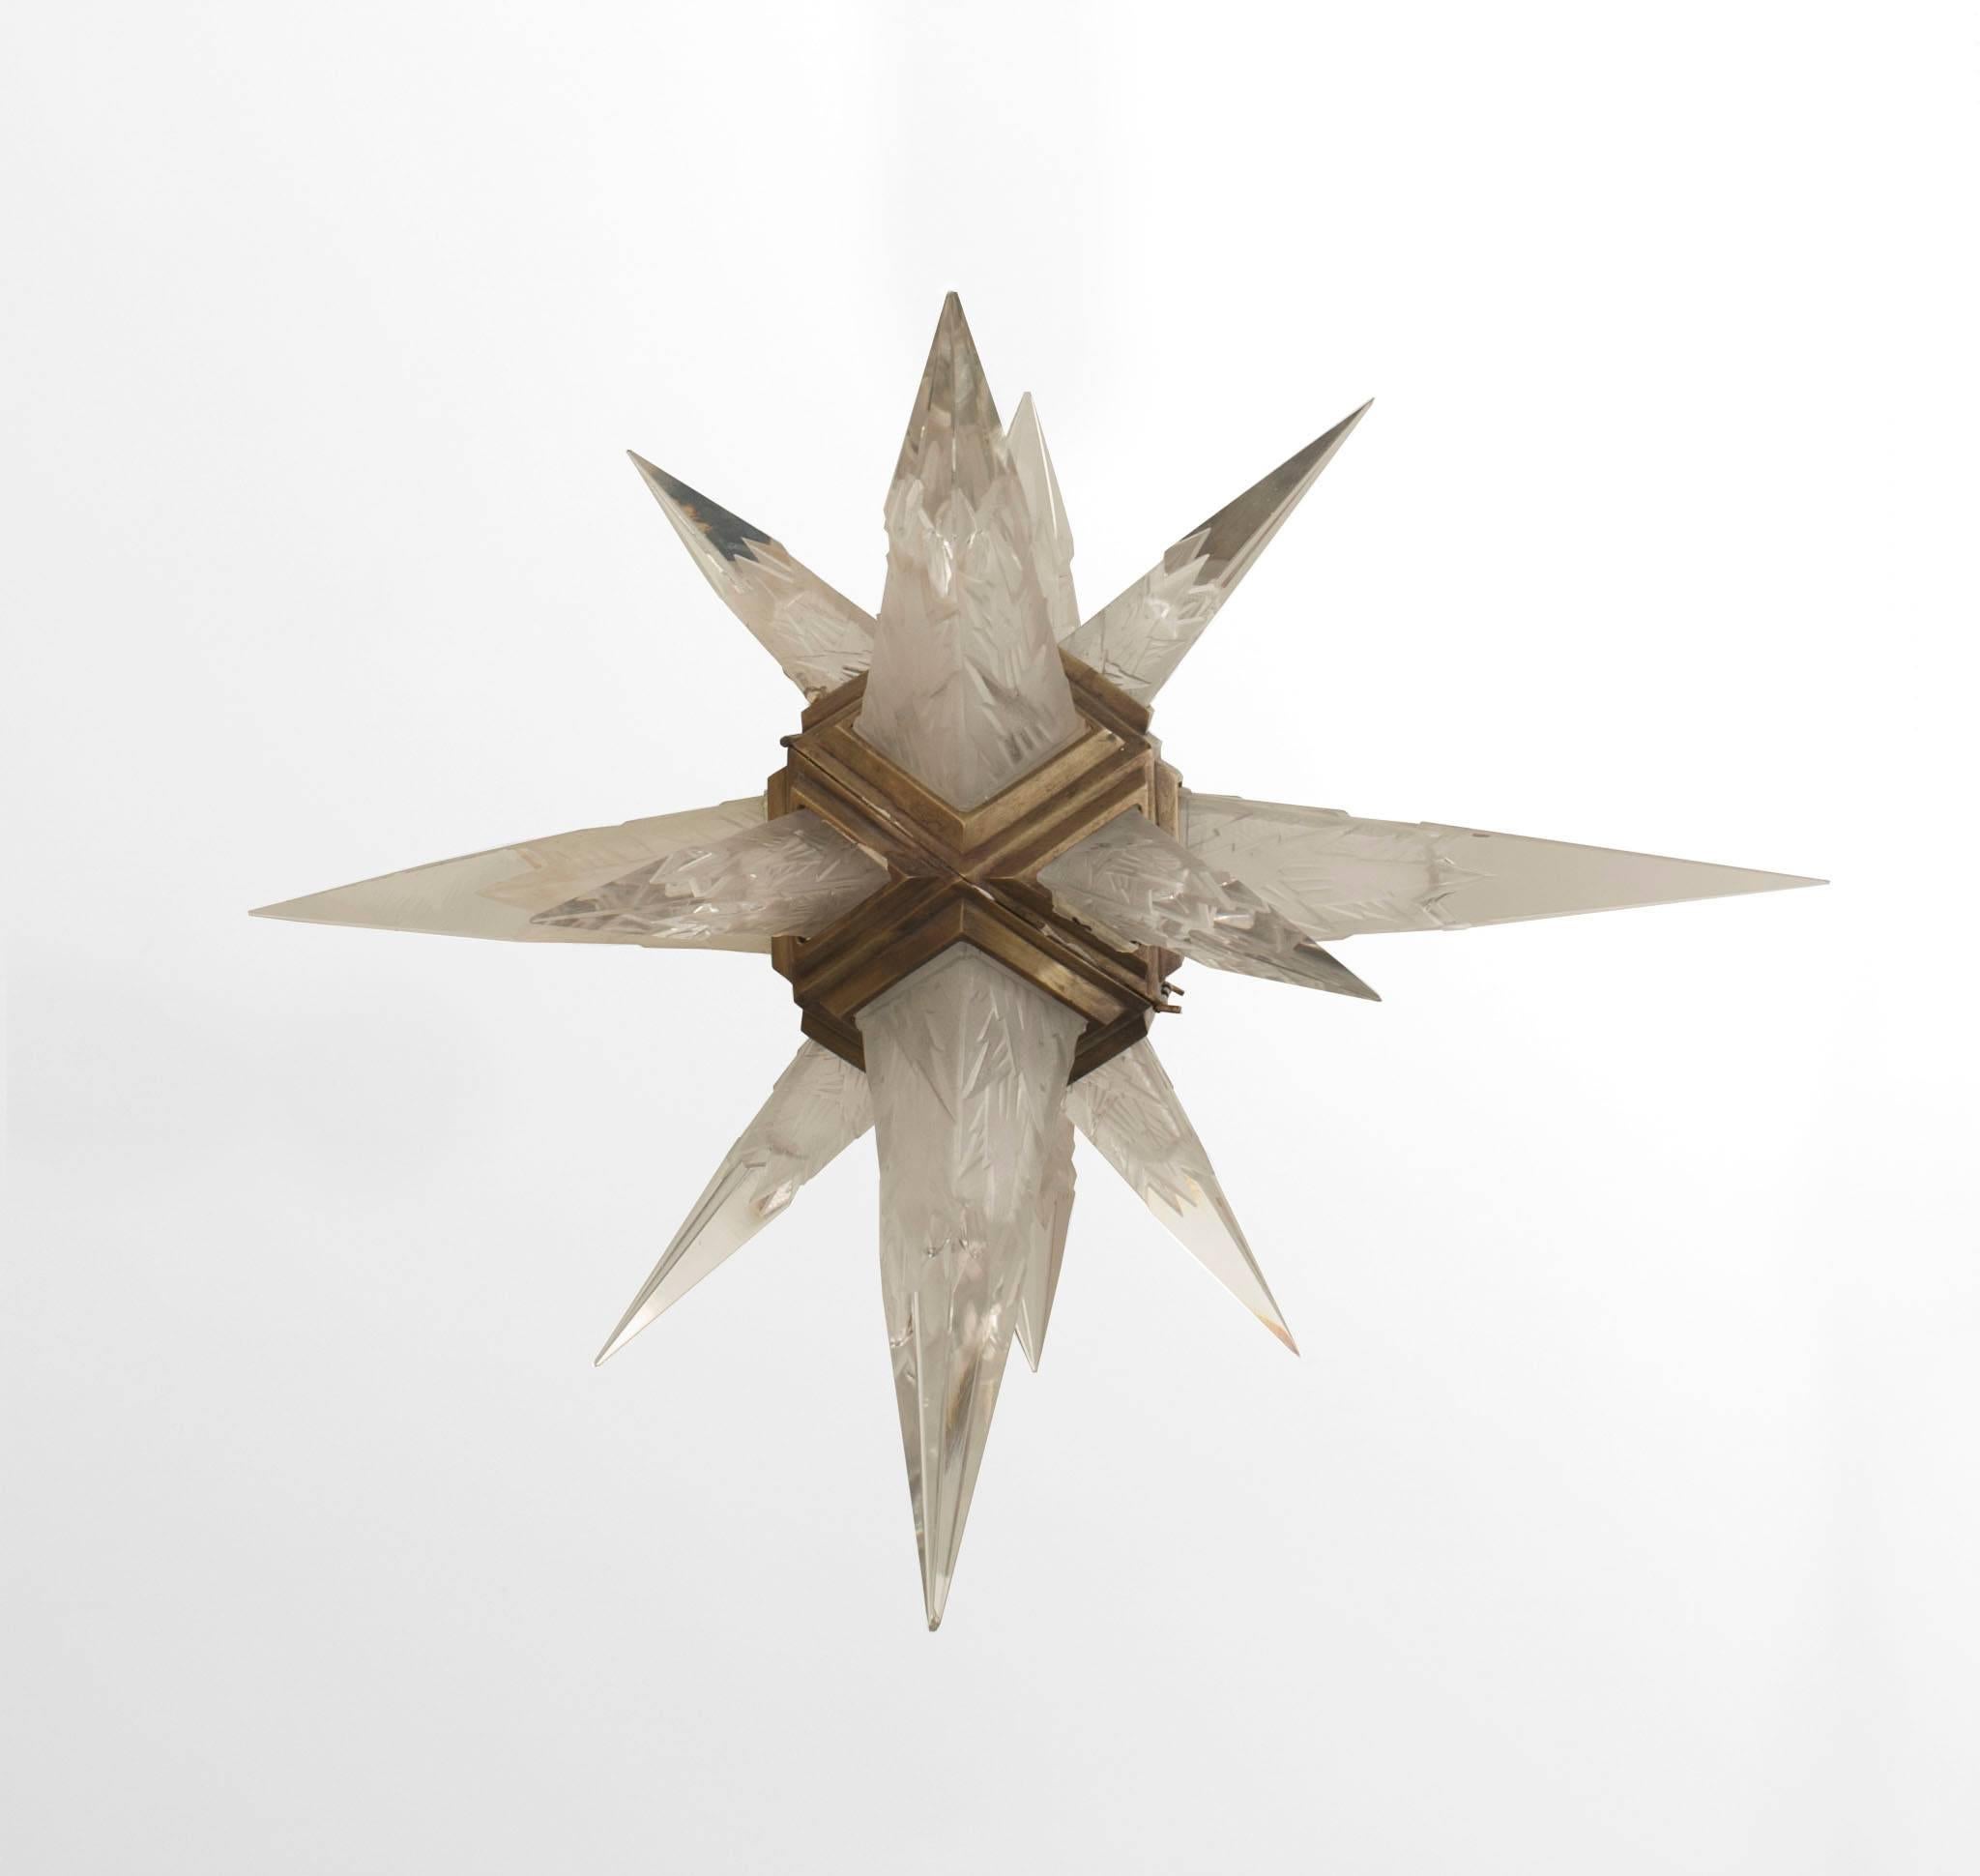 American Art Deco star form chandelier with clear & frosted glass spikes having a geometric design emanating from a silvered bronze cage (by C.J. WEINSTEIN), 1930s.

        